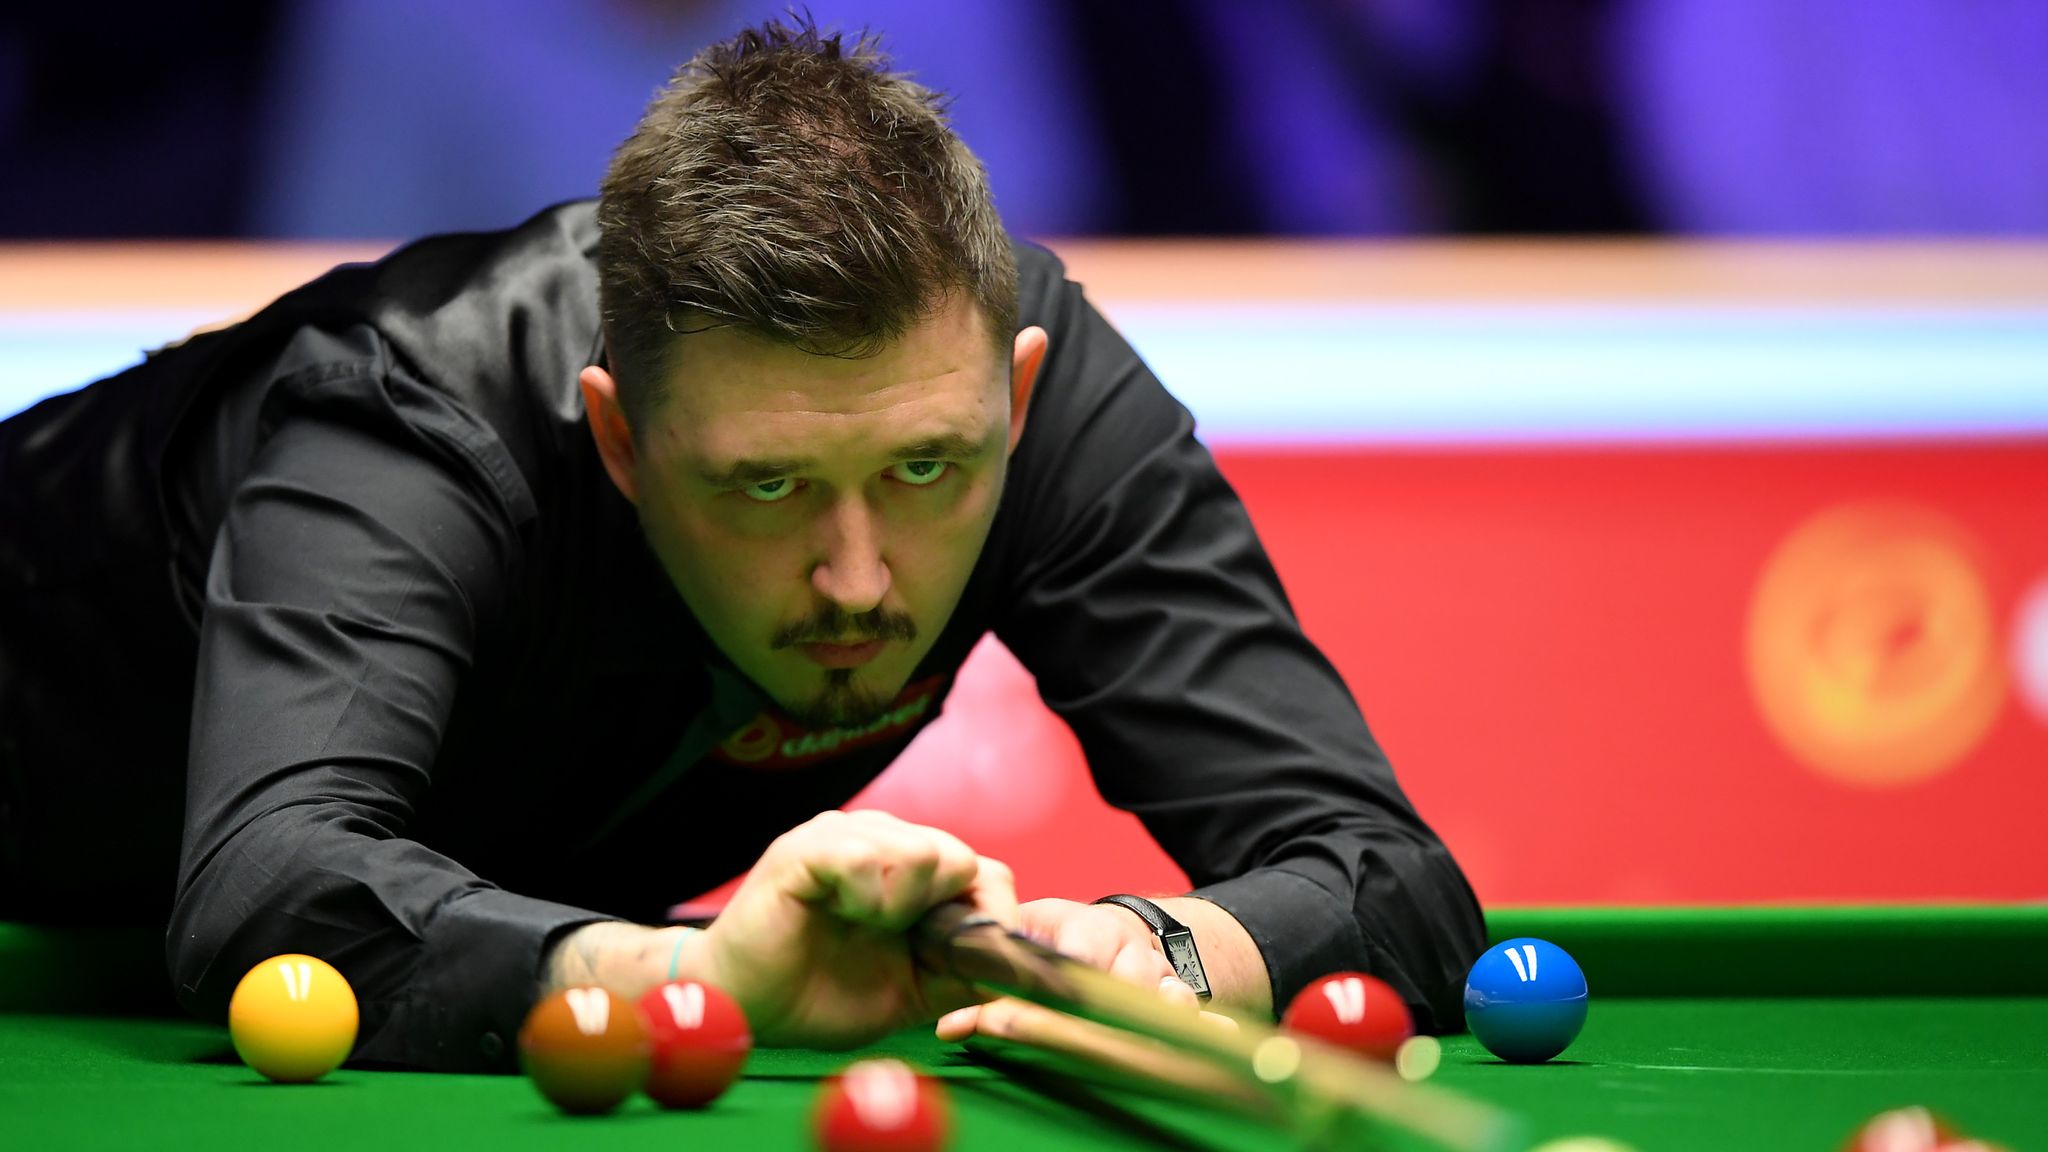 Ronnie OSullivan blasts amateur young players as he reaches World Snooker Championship quarter-finals Snooker News Sky Sports